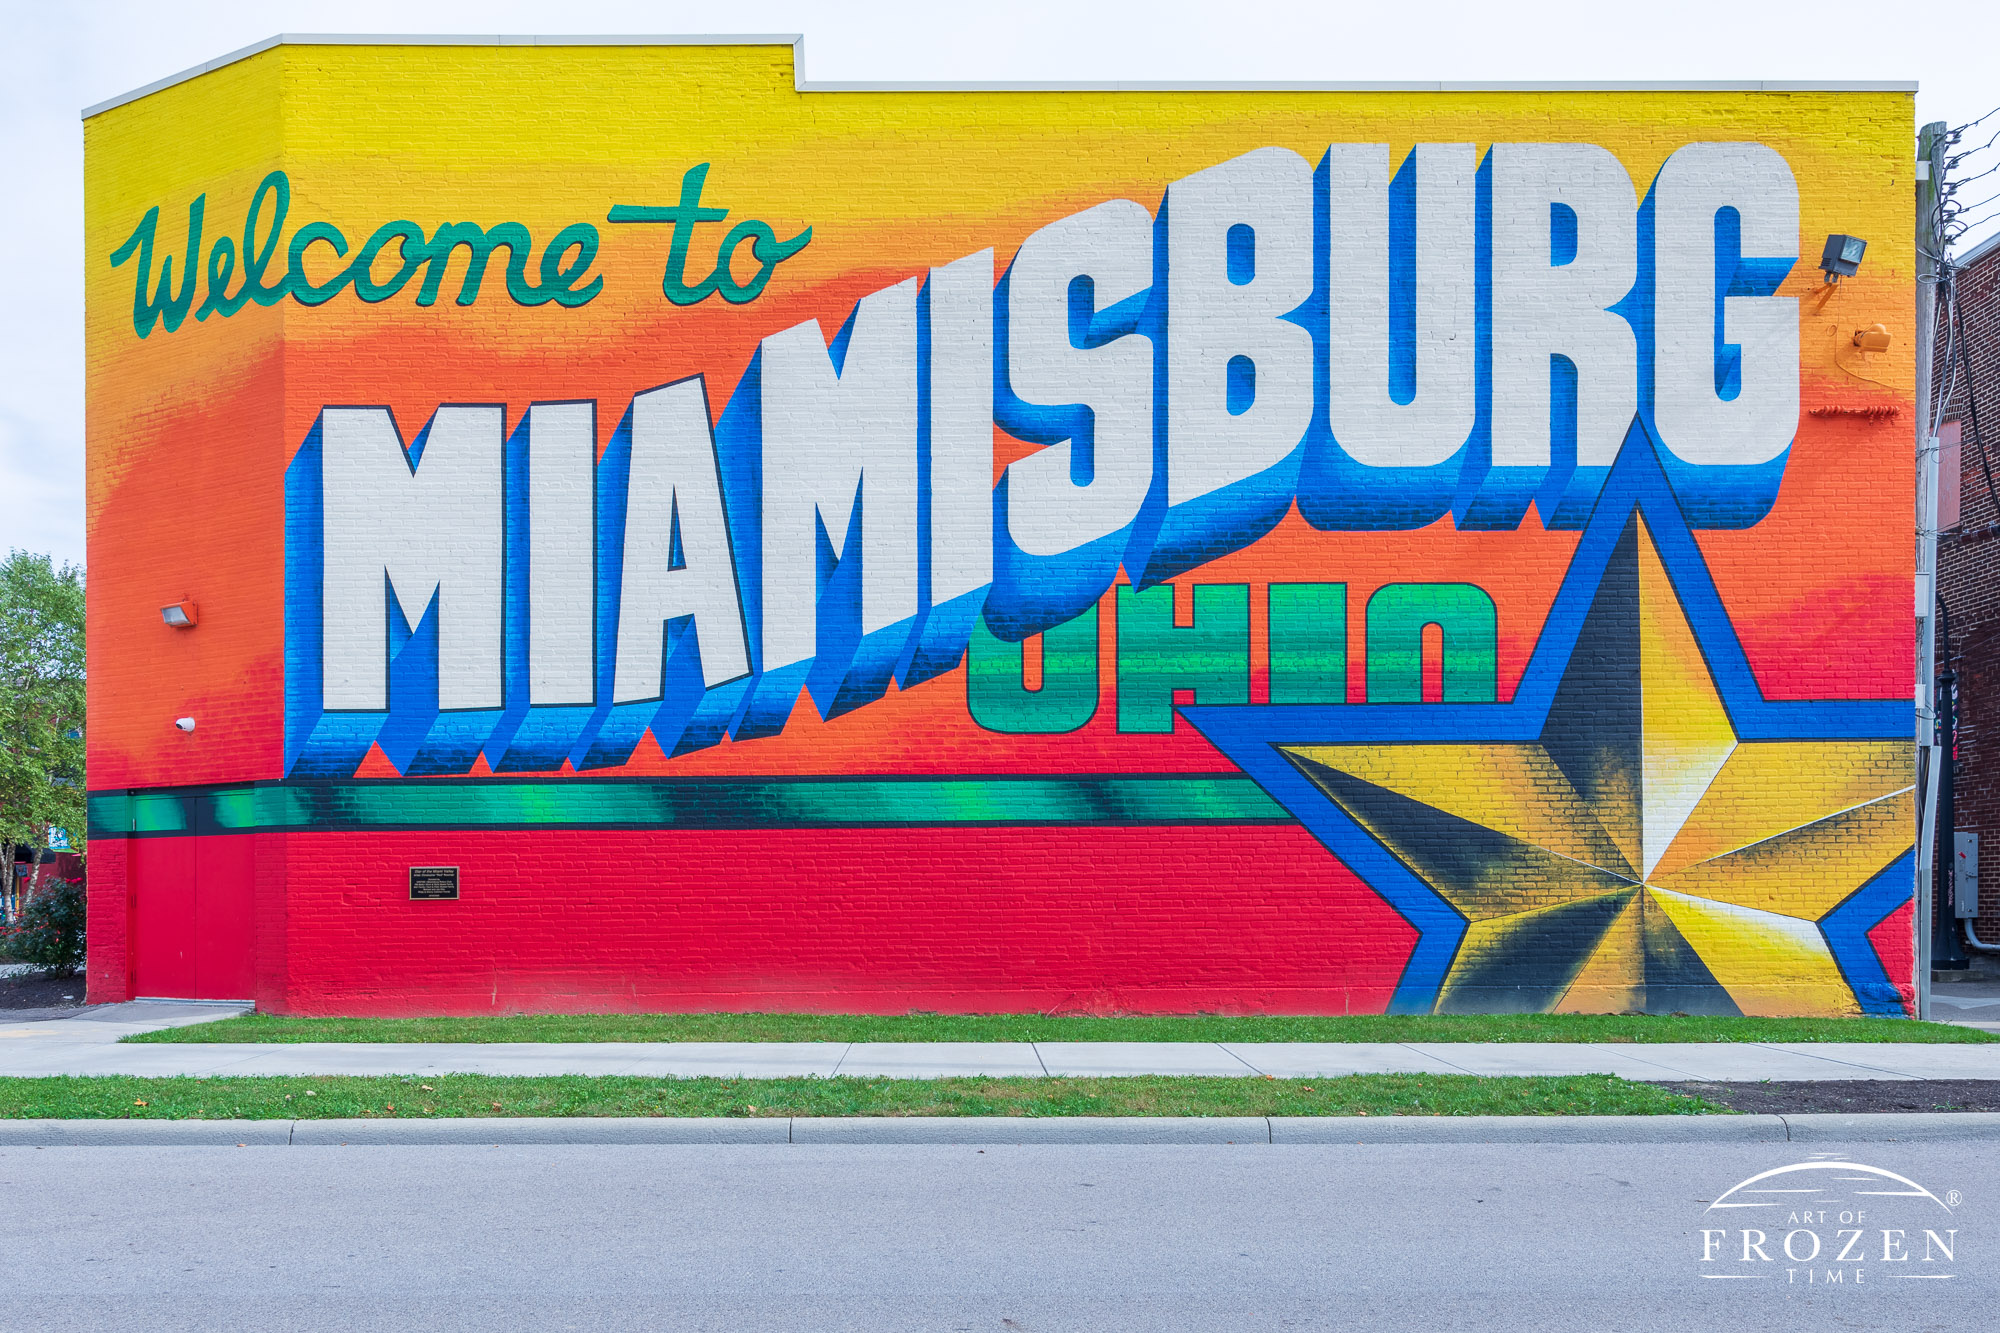 A brightly colored Welcome to Miamisburg Ohio mural